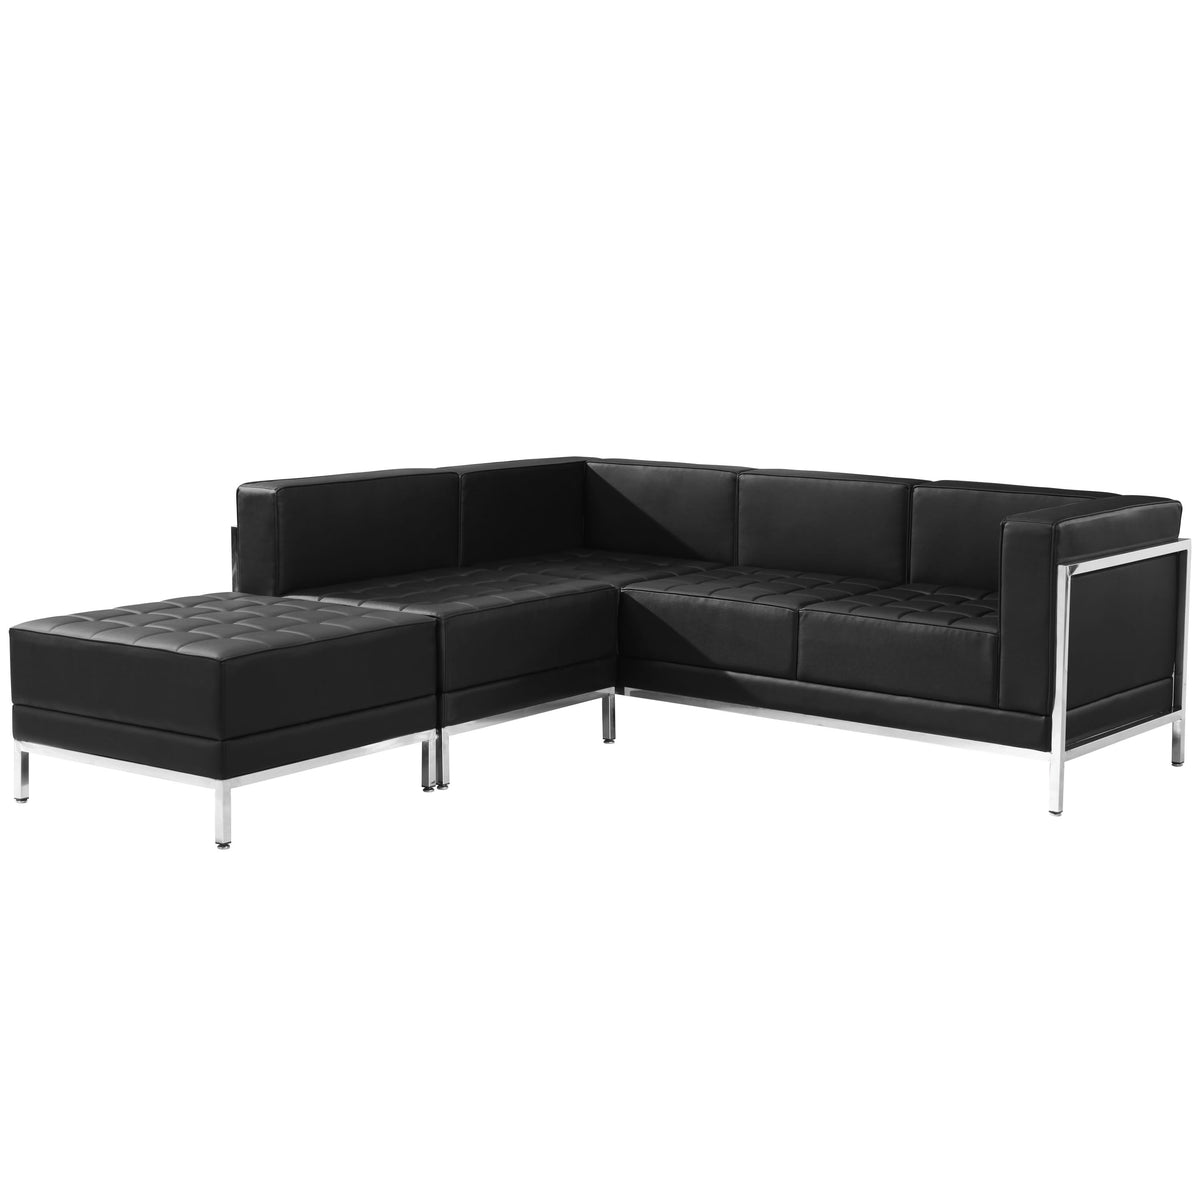 Black |#| 3 Piece Black LeatherSoft Modular Sectional Configuration - Stainless Steel Legs